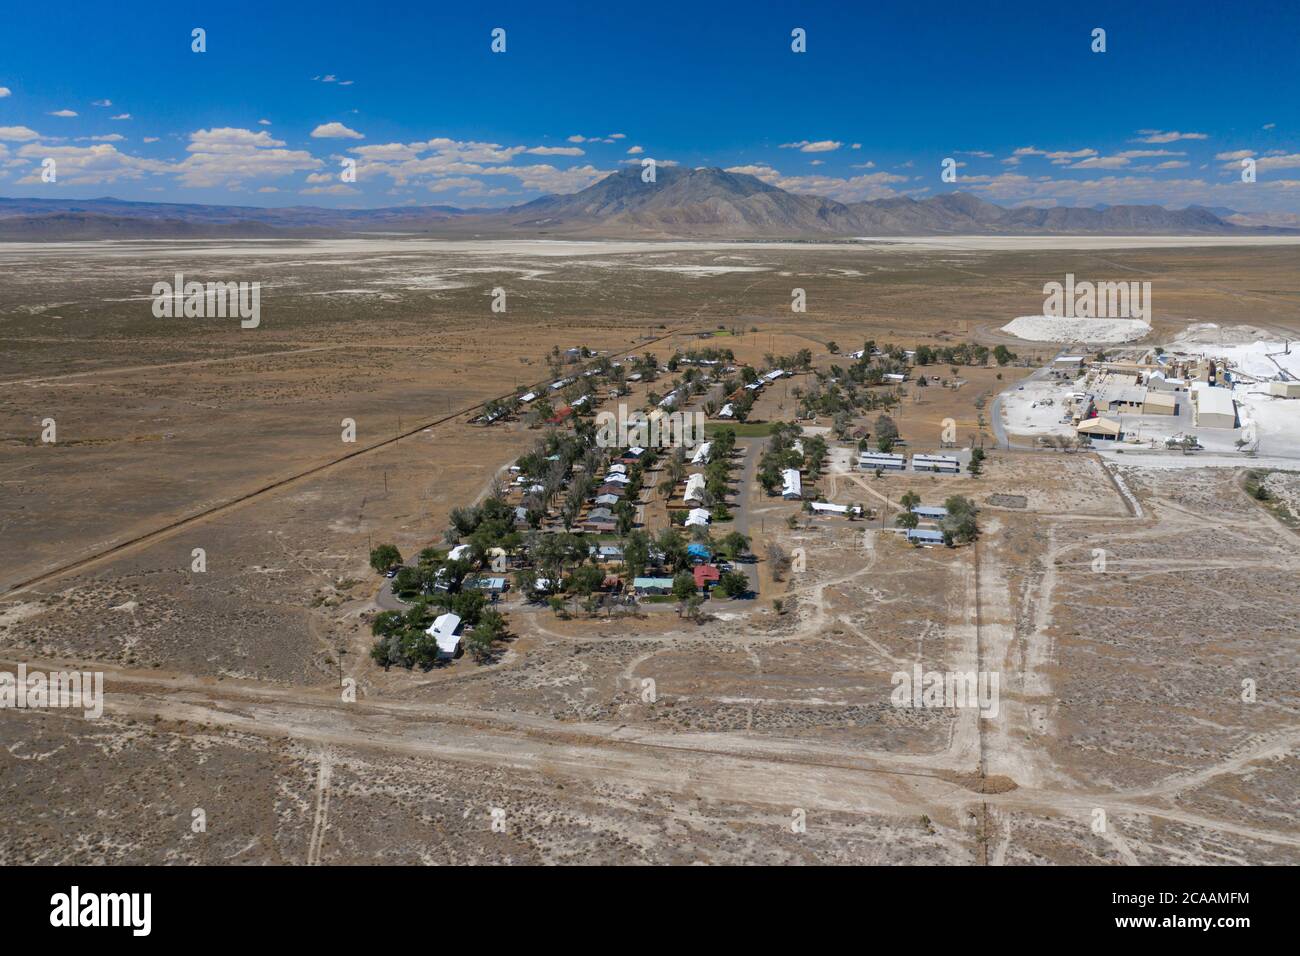 EMPIRE, NEVADA, UNITED STATES - Jul 04, 2020: Aerial photo of the town of Empire, a company town belonging to the Empire Mining Company. Stock Photo